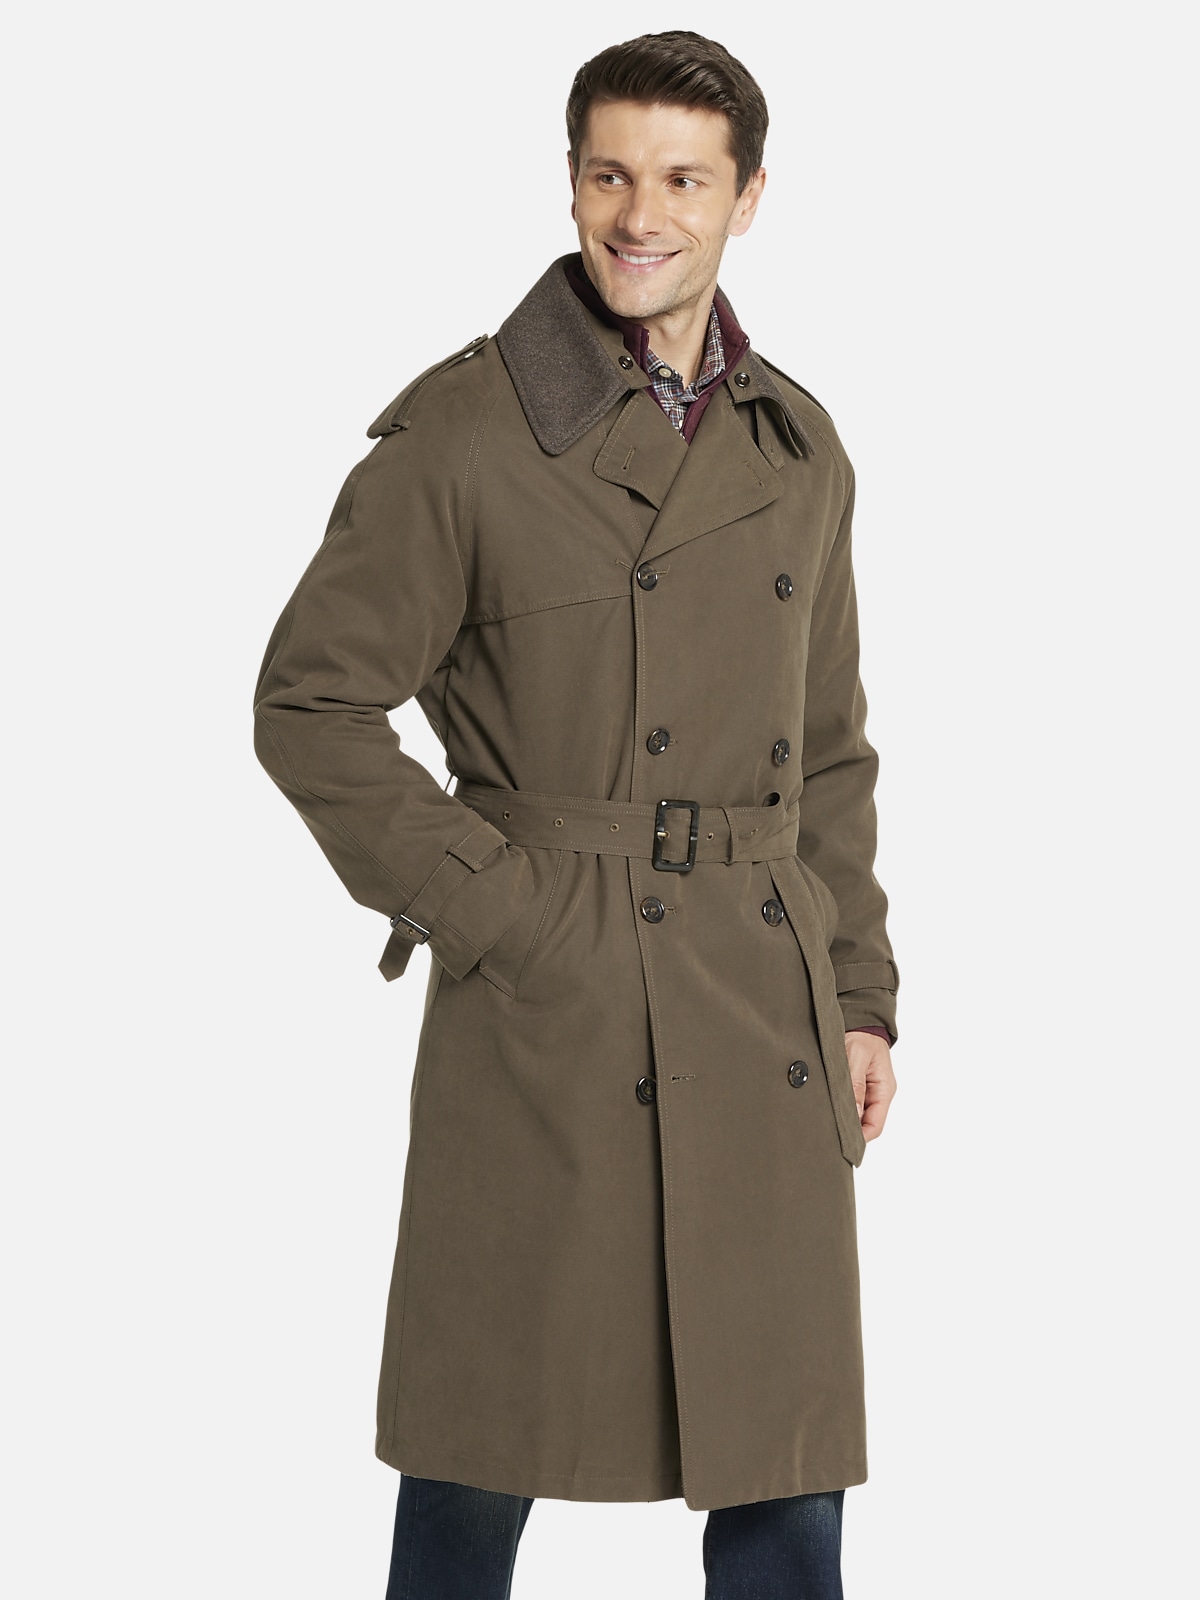 London Fog Classic Trench Coat | All Sale| Men's Wearhouse